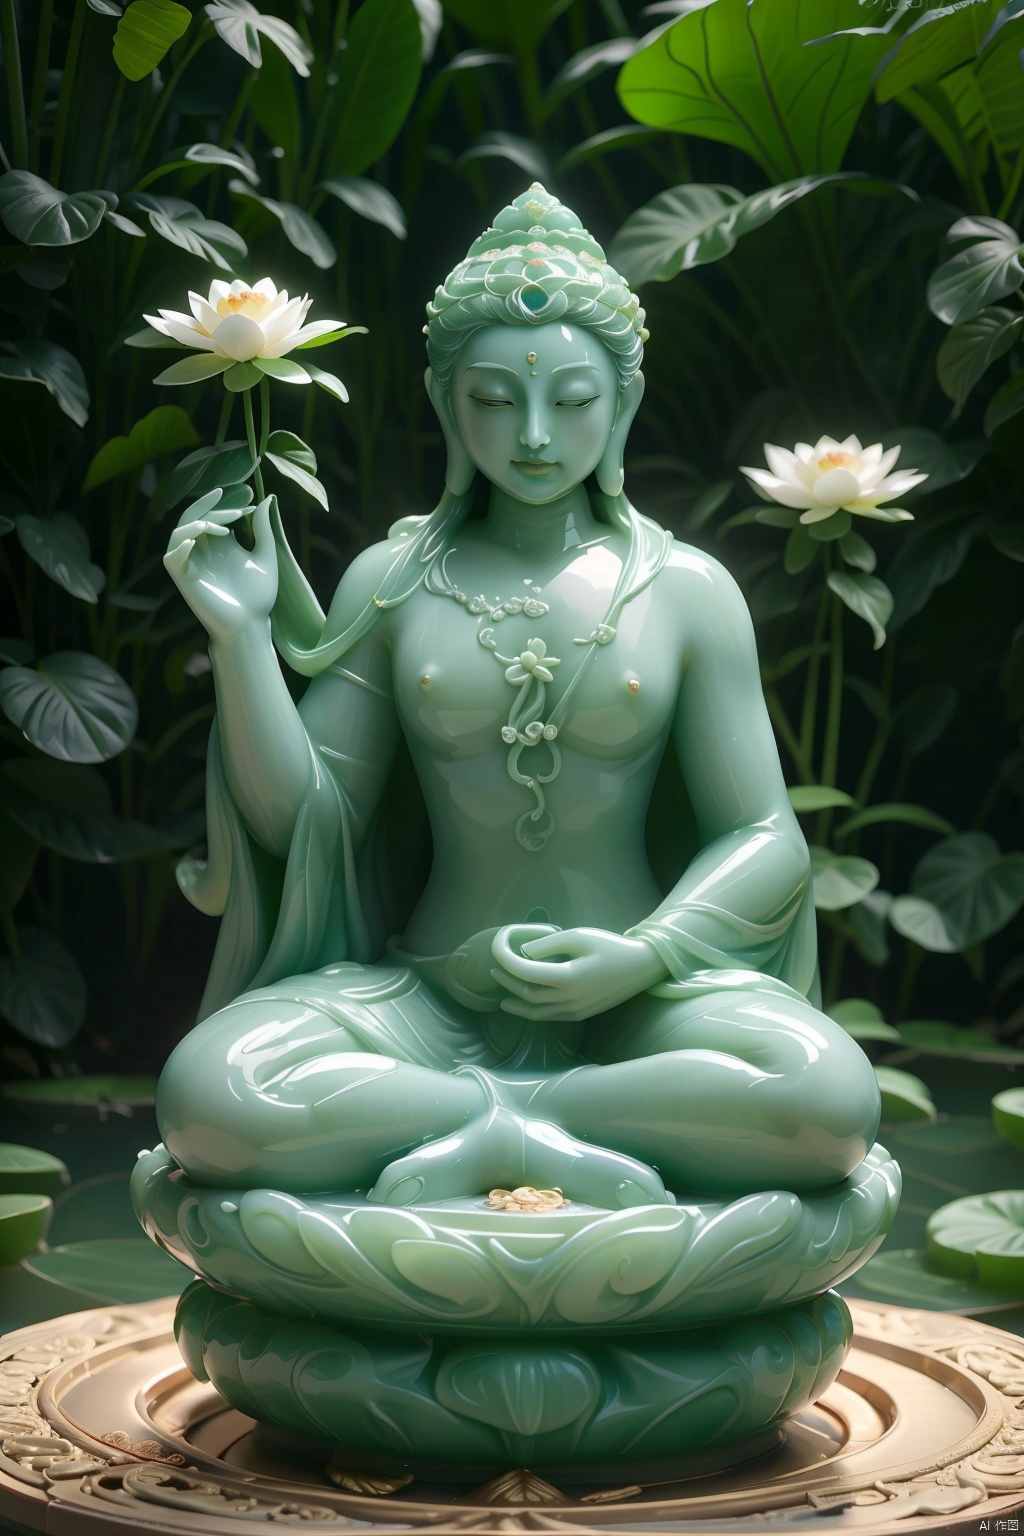 Lotus-Born Buddha Realm: Floating on a tranquil pond, a majestic Padmasambhava statue emerges, his form adorned with intricate mandala motifs and crowned with a halo of lotus petals. Cast in bronze with a patina of verdigris, he symbolizes spiritual rebirth in this garden of meditation.